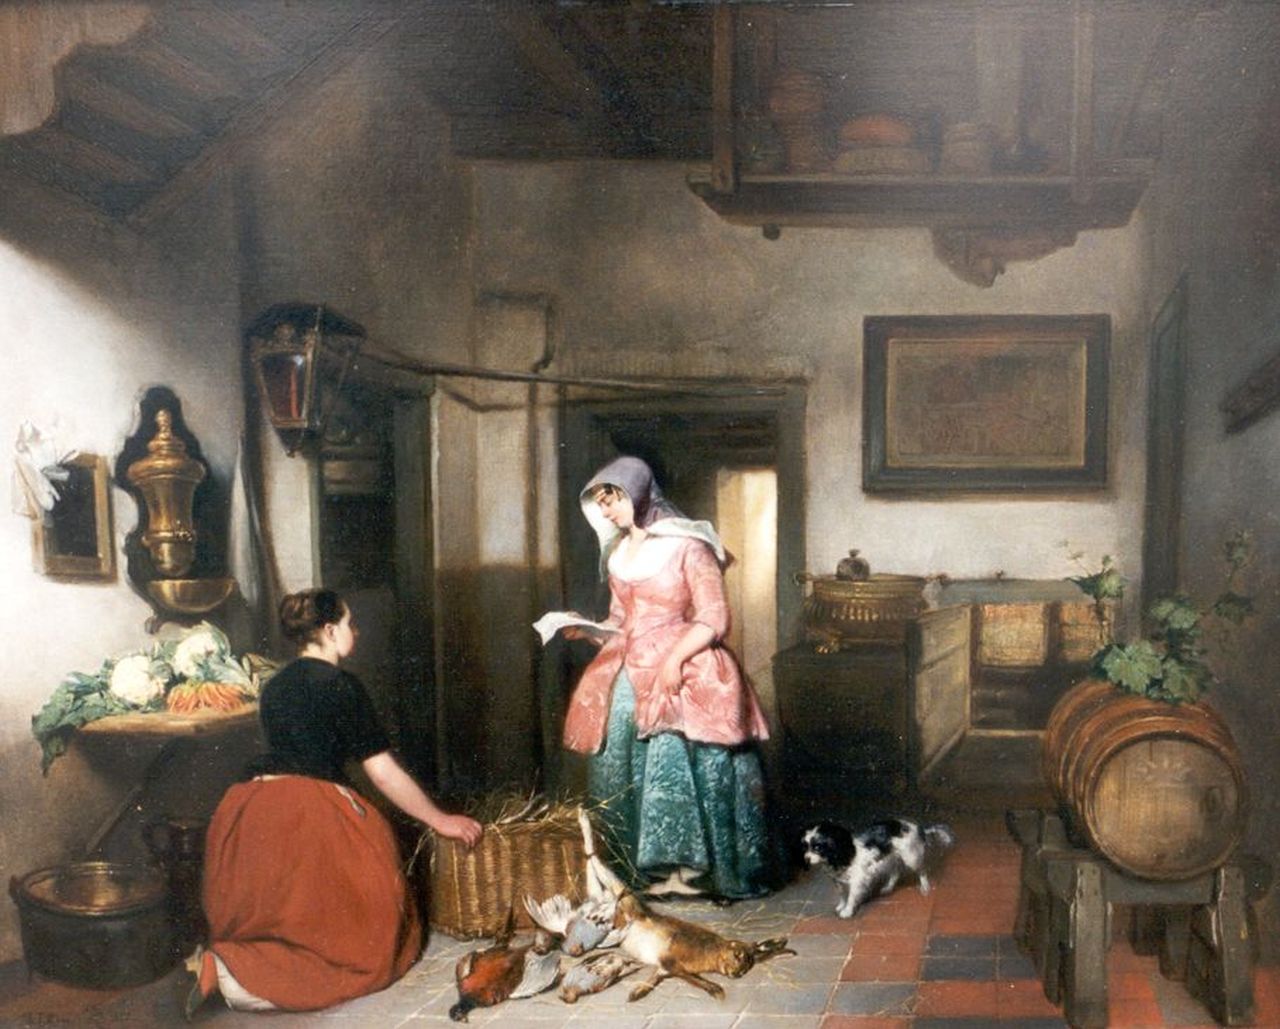 Hove H. van | Hubertus 'Huib' van Hove, The letter, oil on panel 44.2 x 56.0 cm, signed l.l. and dated 1852